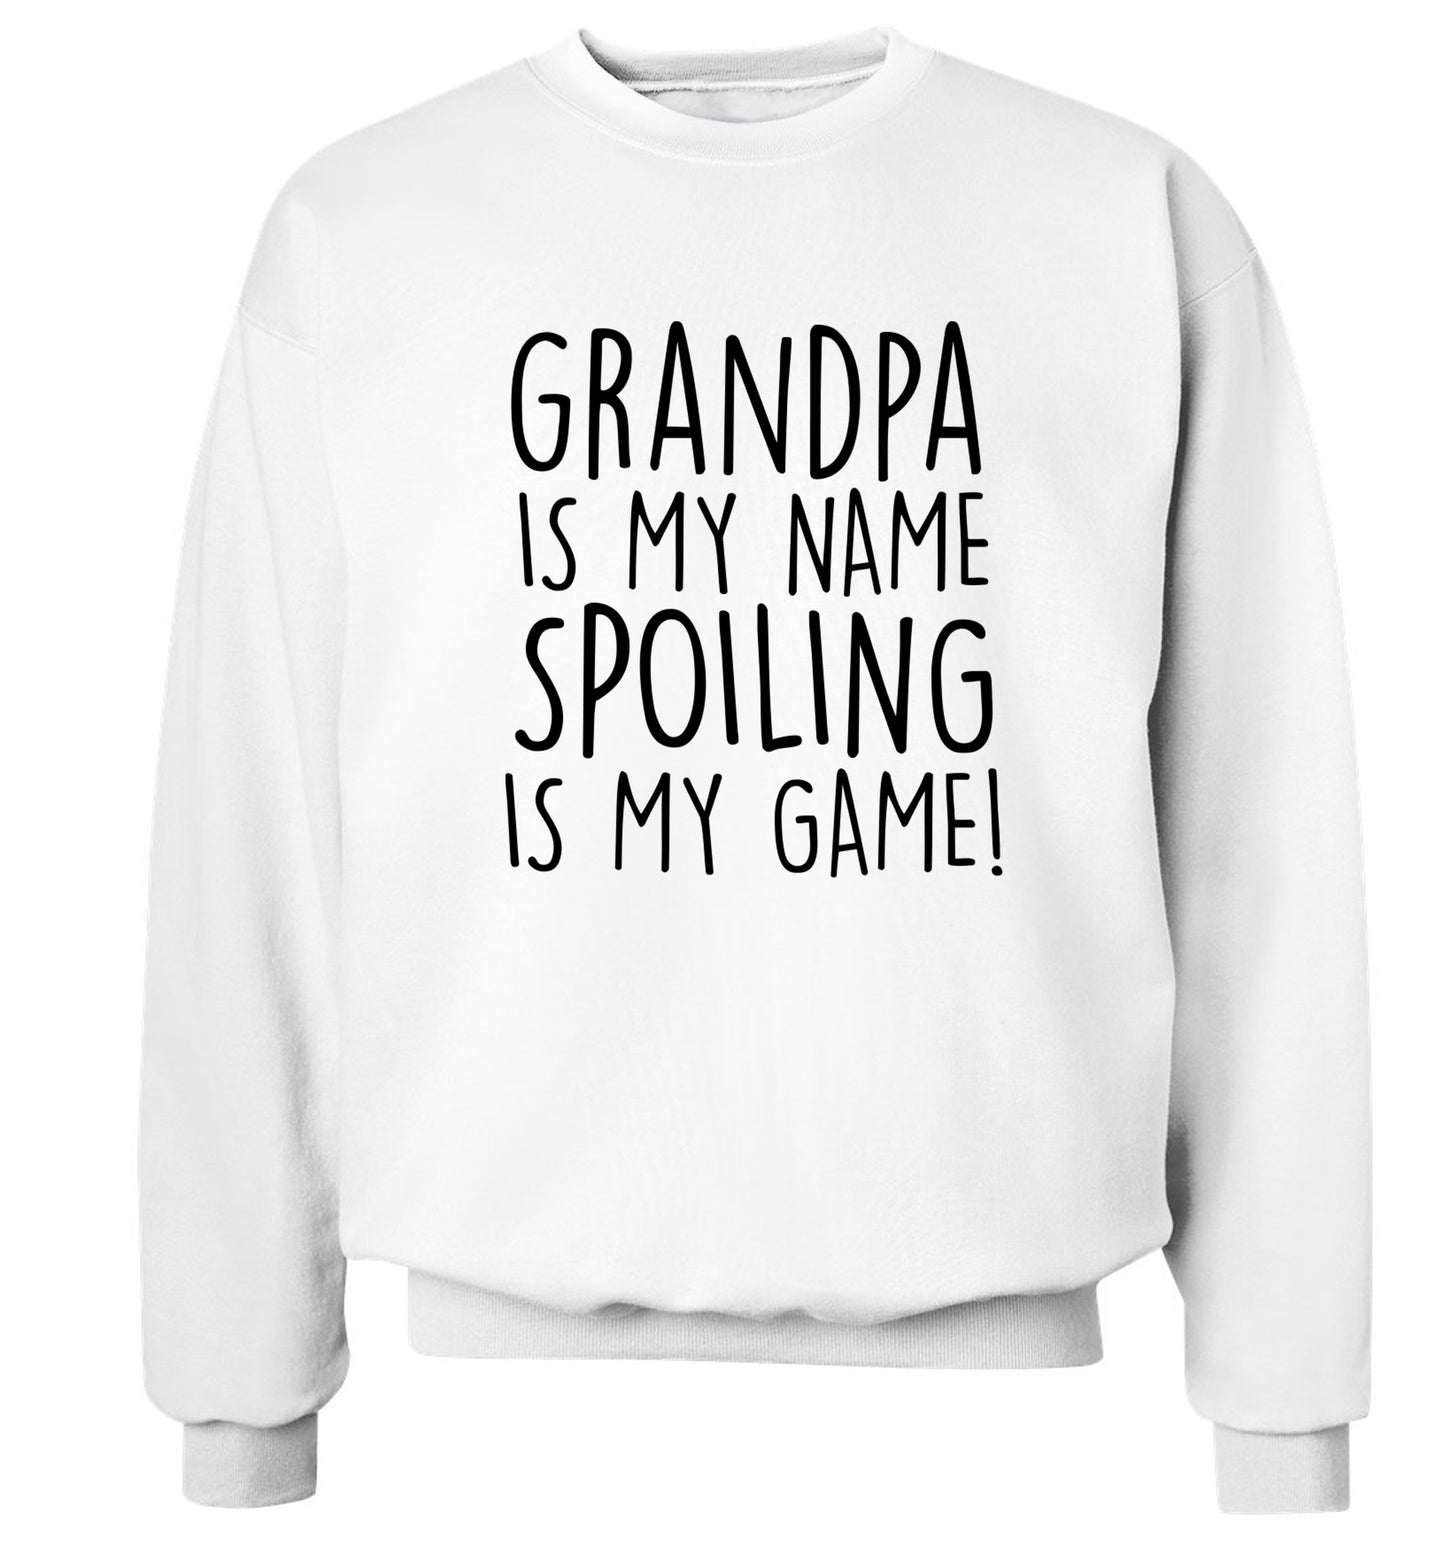 Grandpa is my name, spoiling is my game Adult's unisex white Sweater 2XL